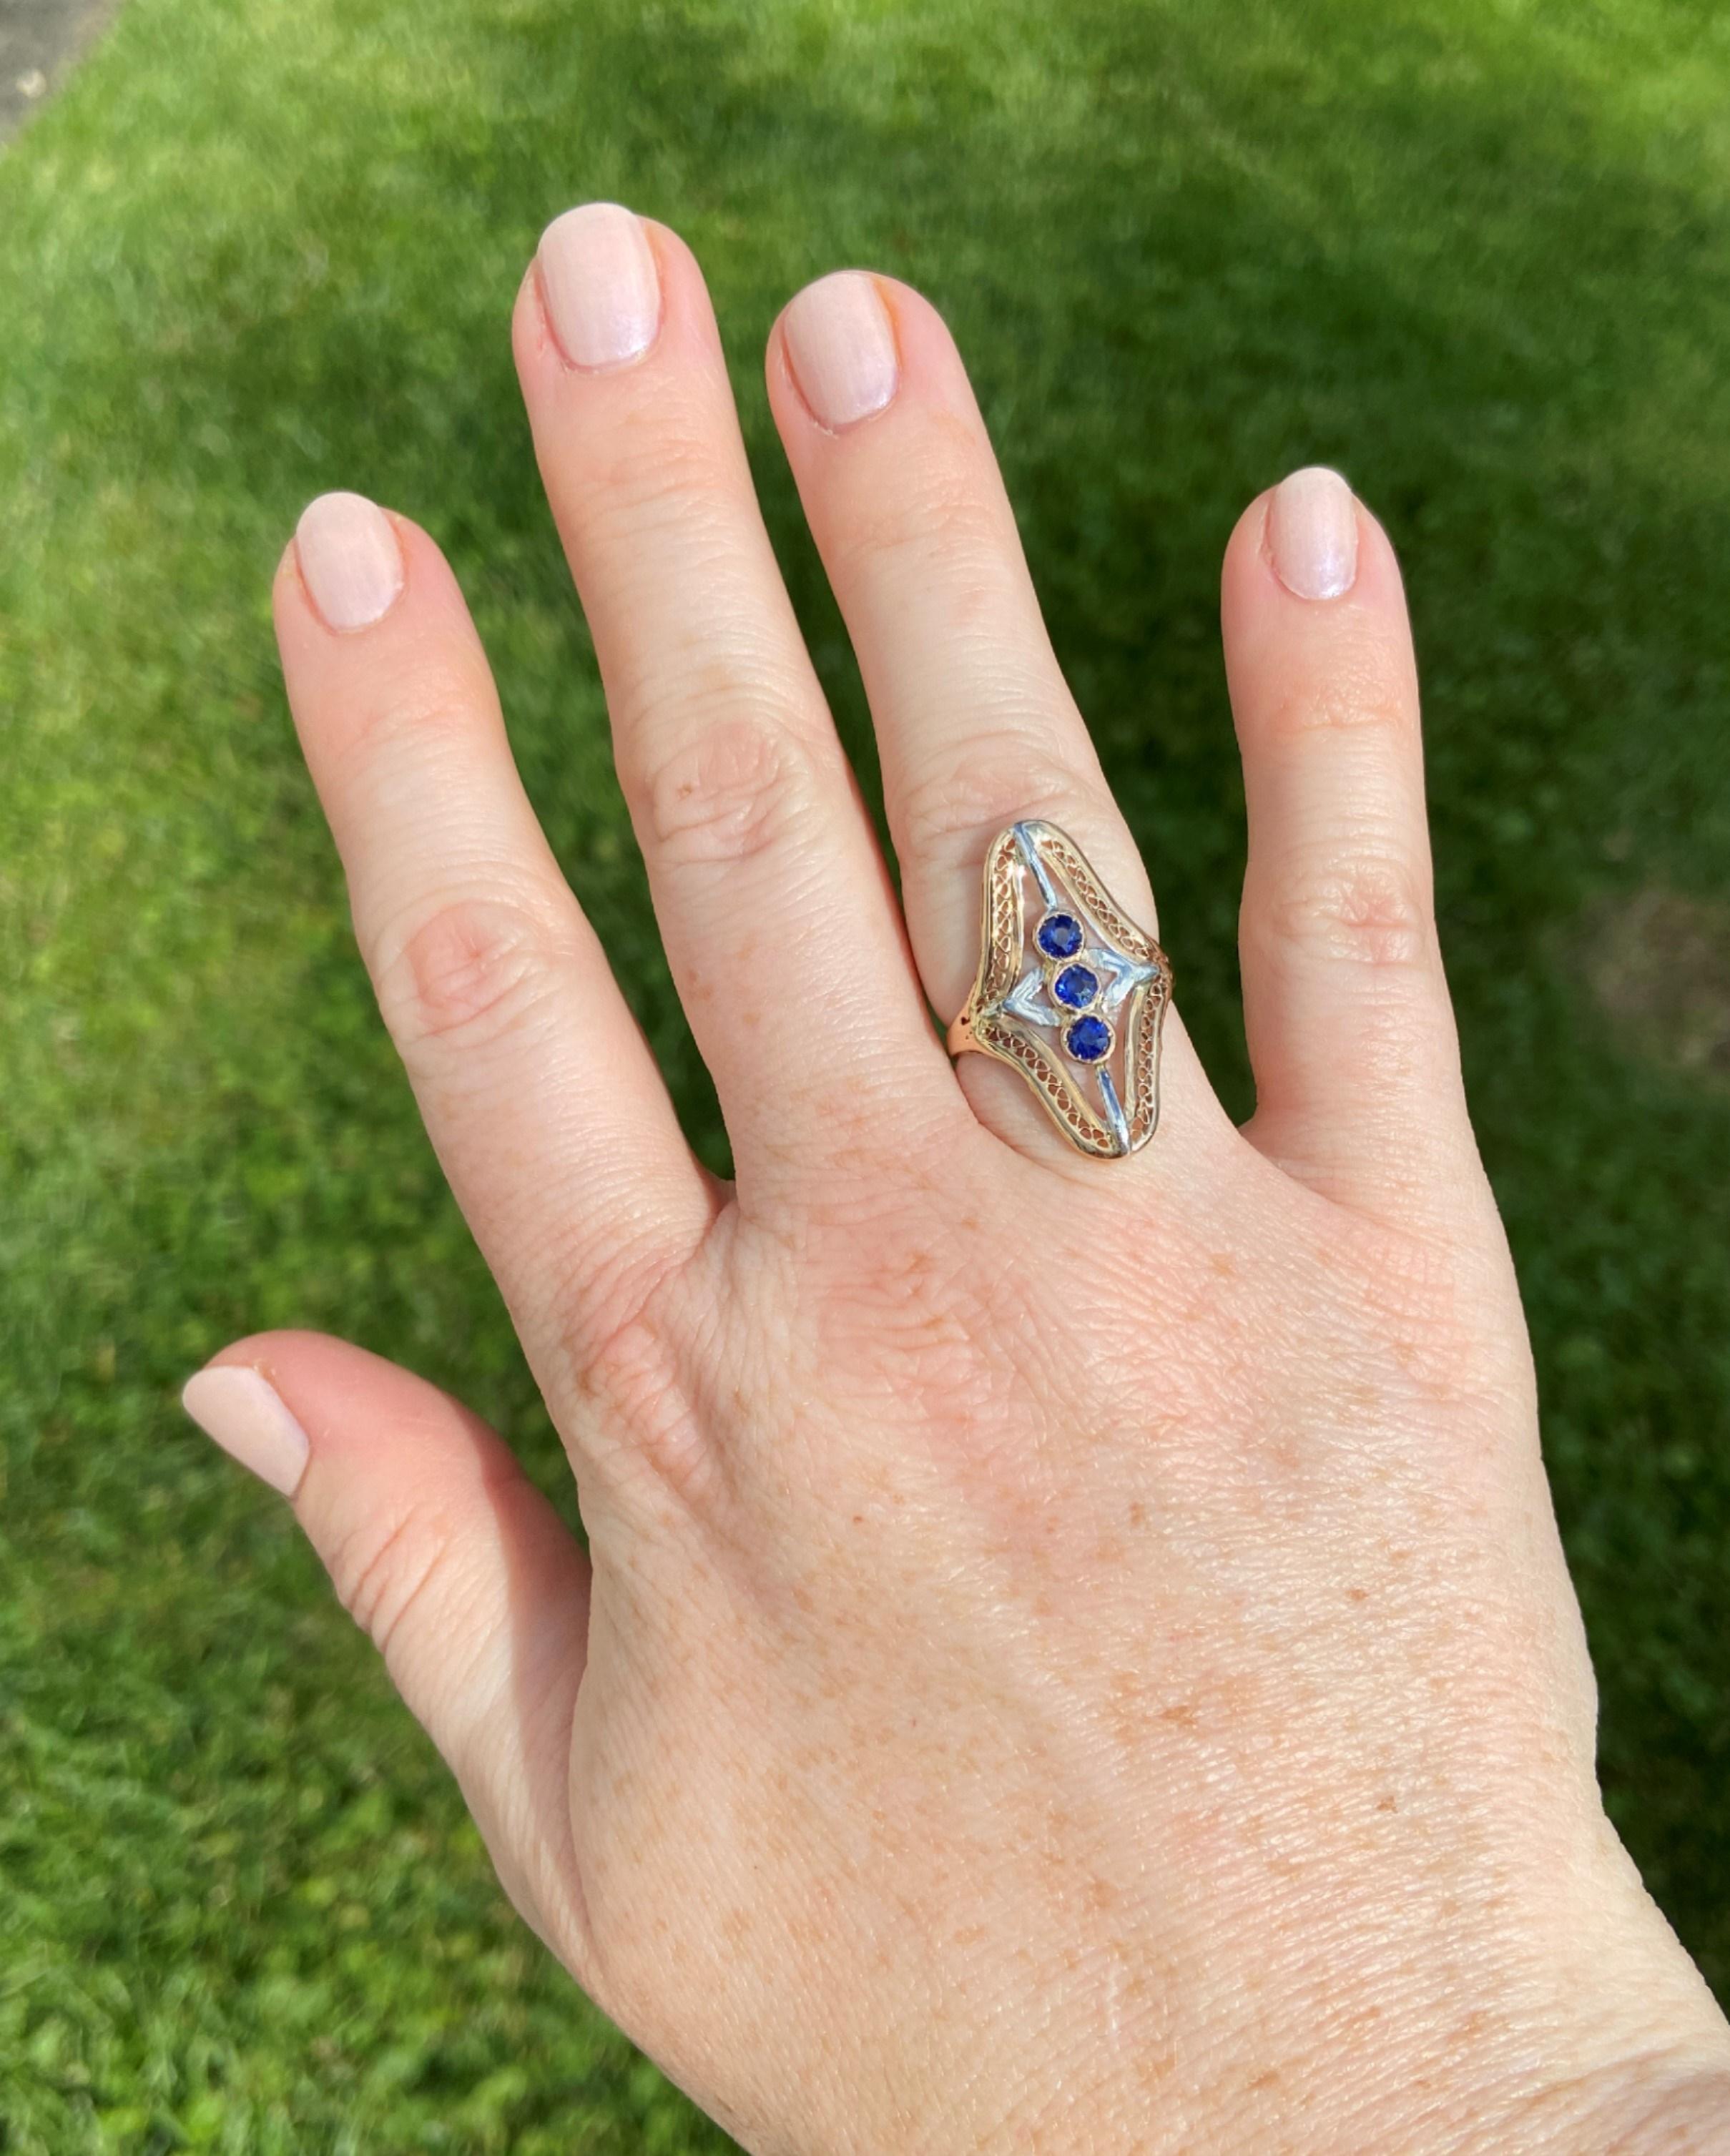 Three deep blue 0.75tcw natural sapphires are the centerpiece of this incredibly detailed ring. The length of the ring is very flattering on the hand, and the slight bowed shape makes it effortlessly comfortable to wear. It is silky smooth and low